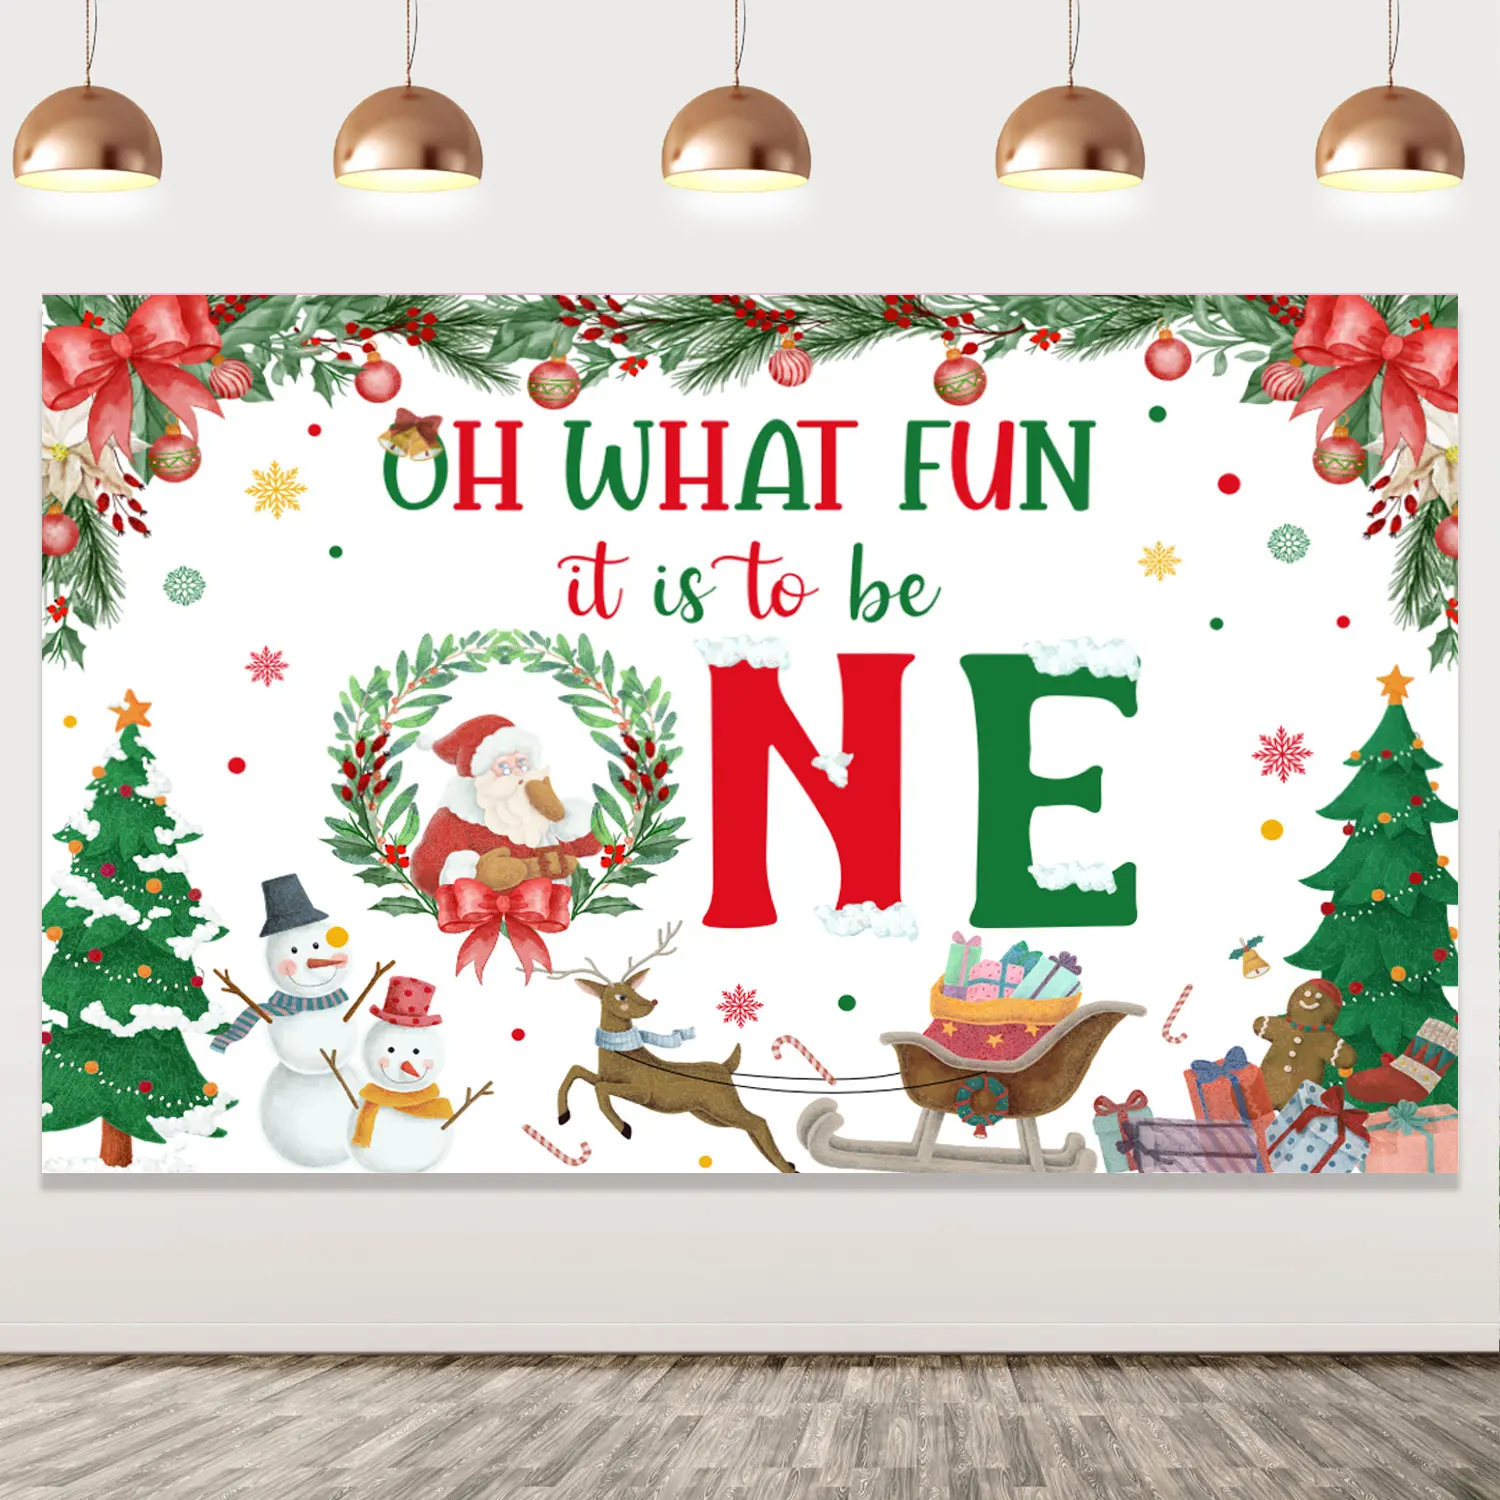 

Christmas Oh What Fun It Is To Be One Backdrop Santa Claus Deer Snowman Christmas Tree Kids 1st Birthday Party Decoration